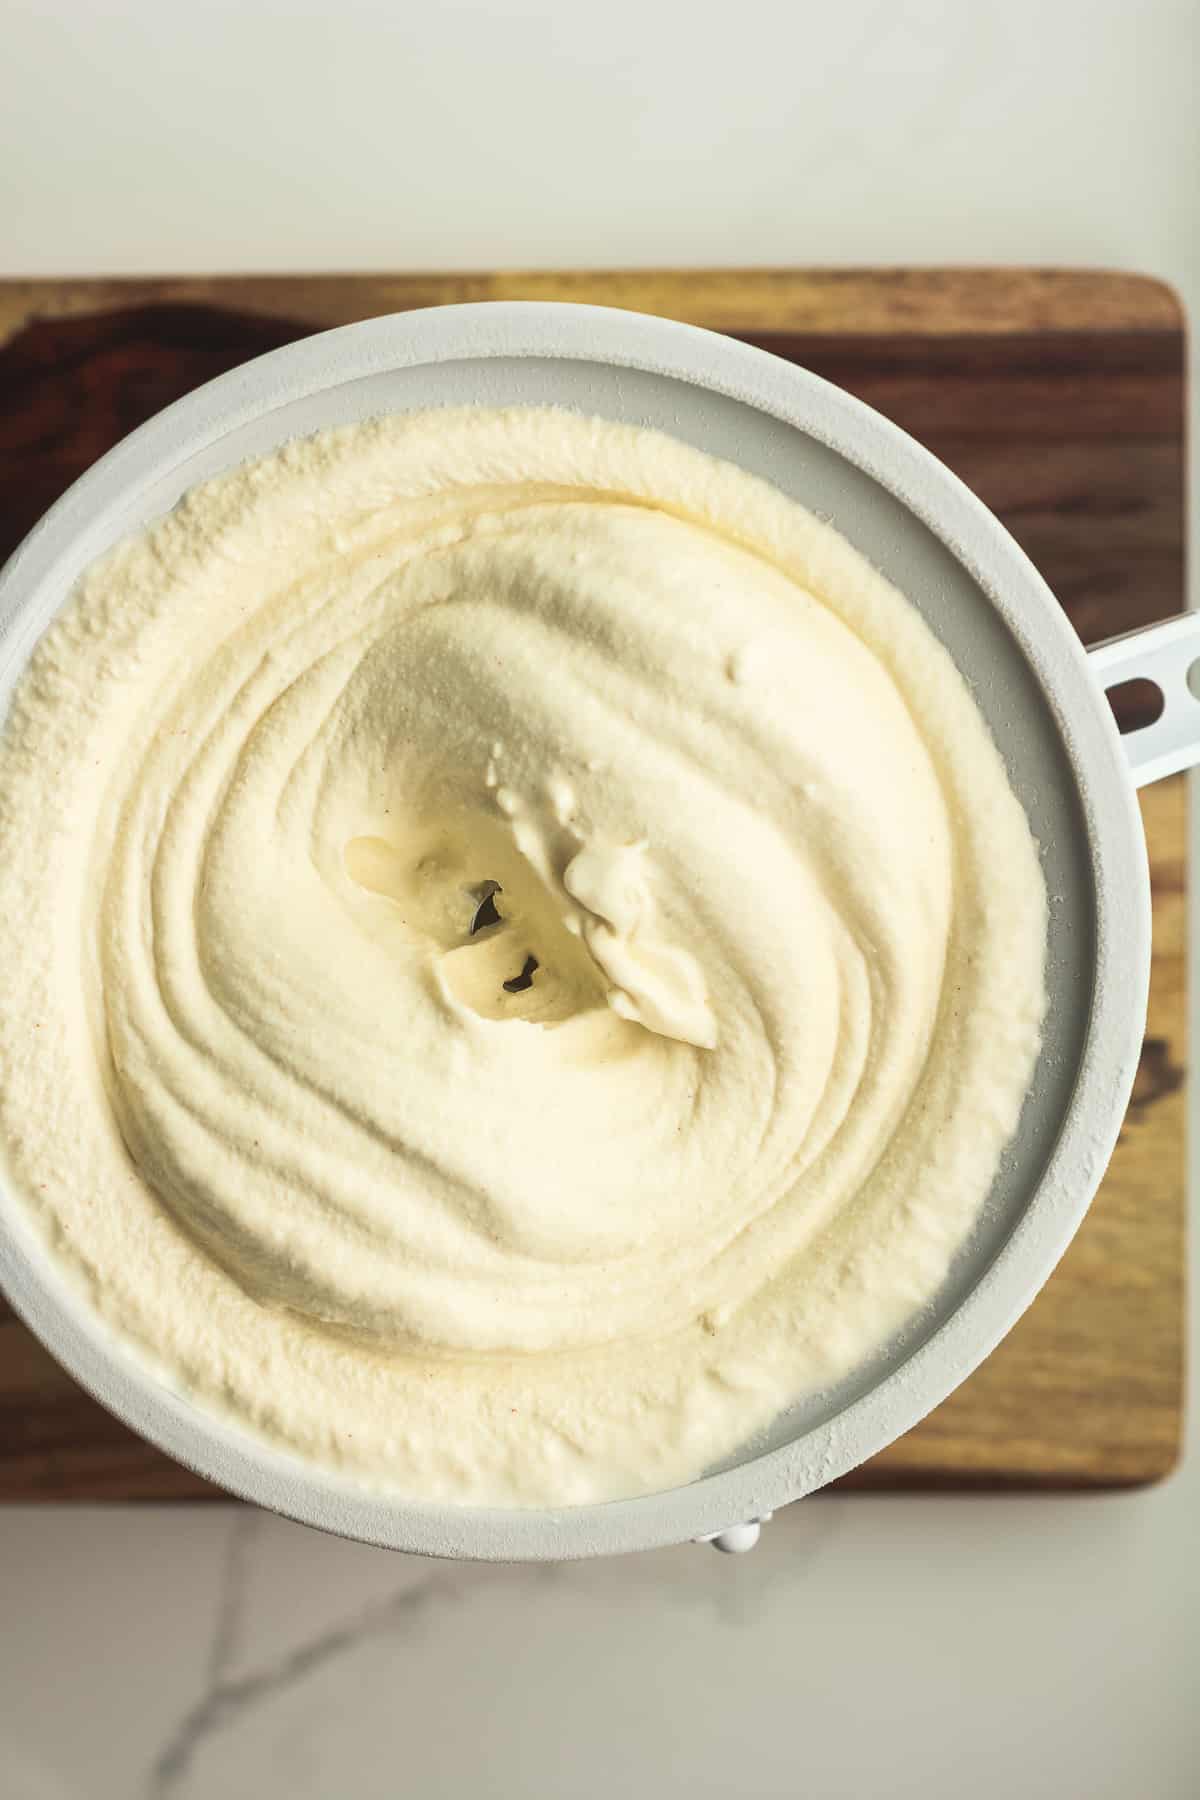 How to make Homemade Ice Cream in a KitchenAid Attachment